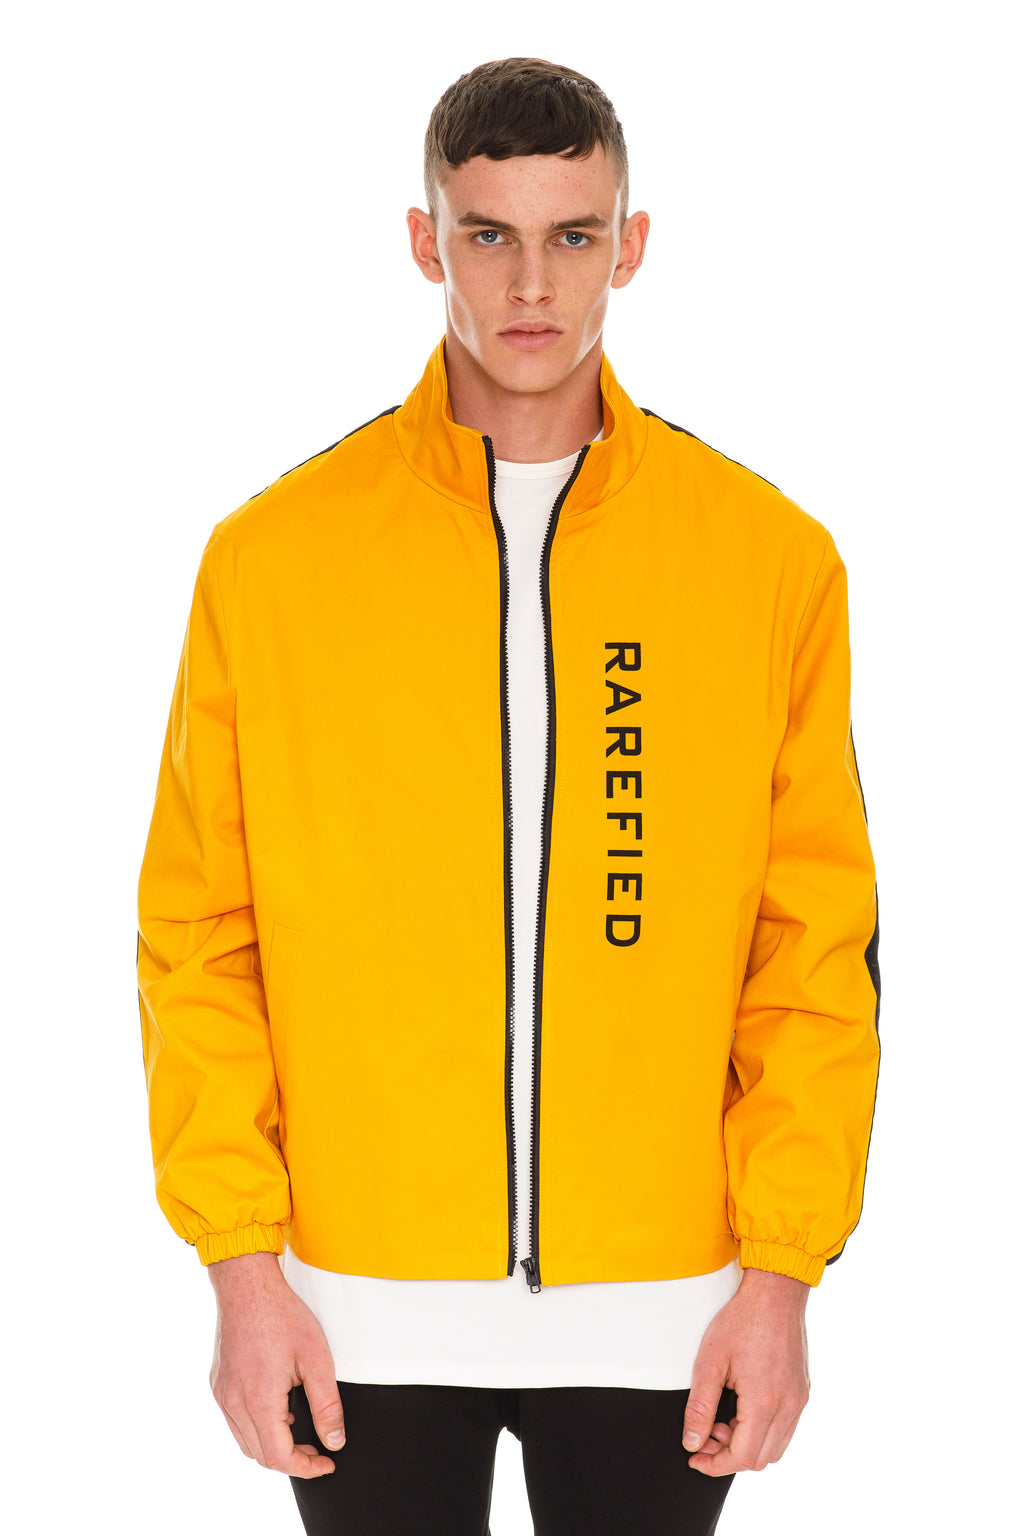 Mustard Rare Jacket With Embroidered Rarefied Quote